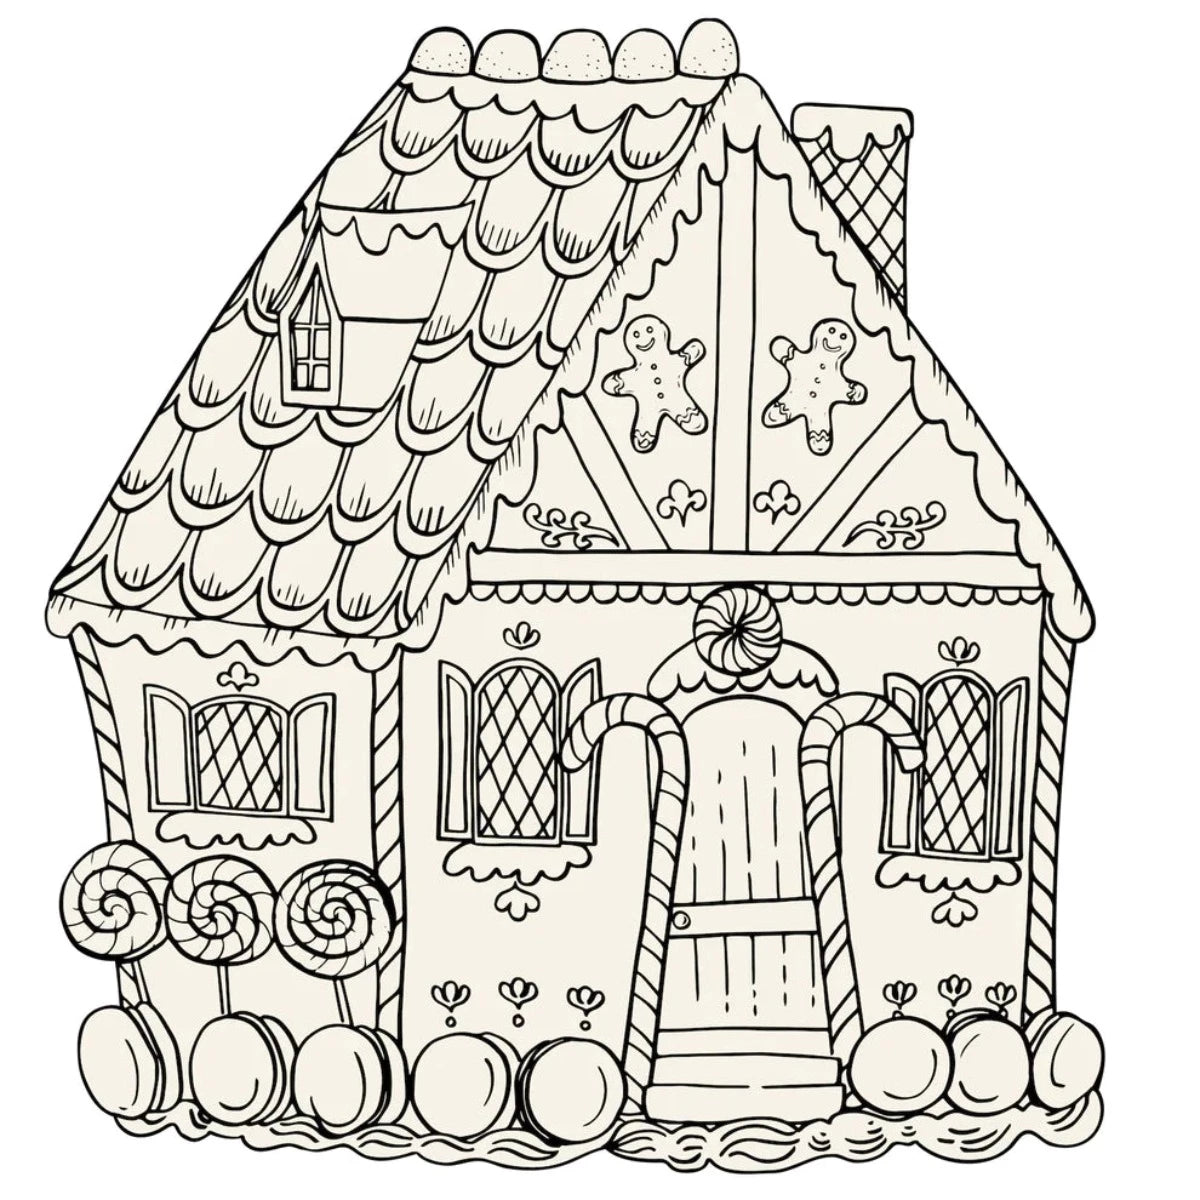 Die Cut Gingerbread House Coloring Placemats